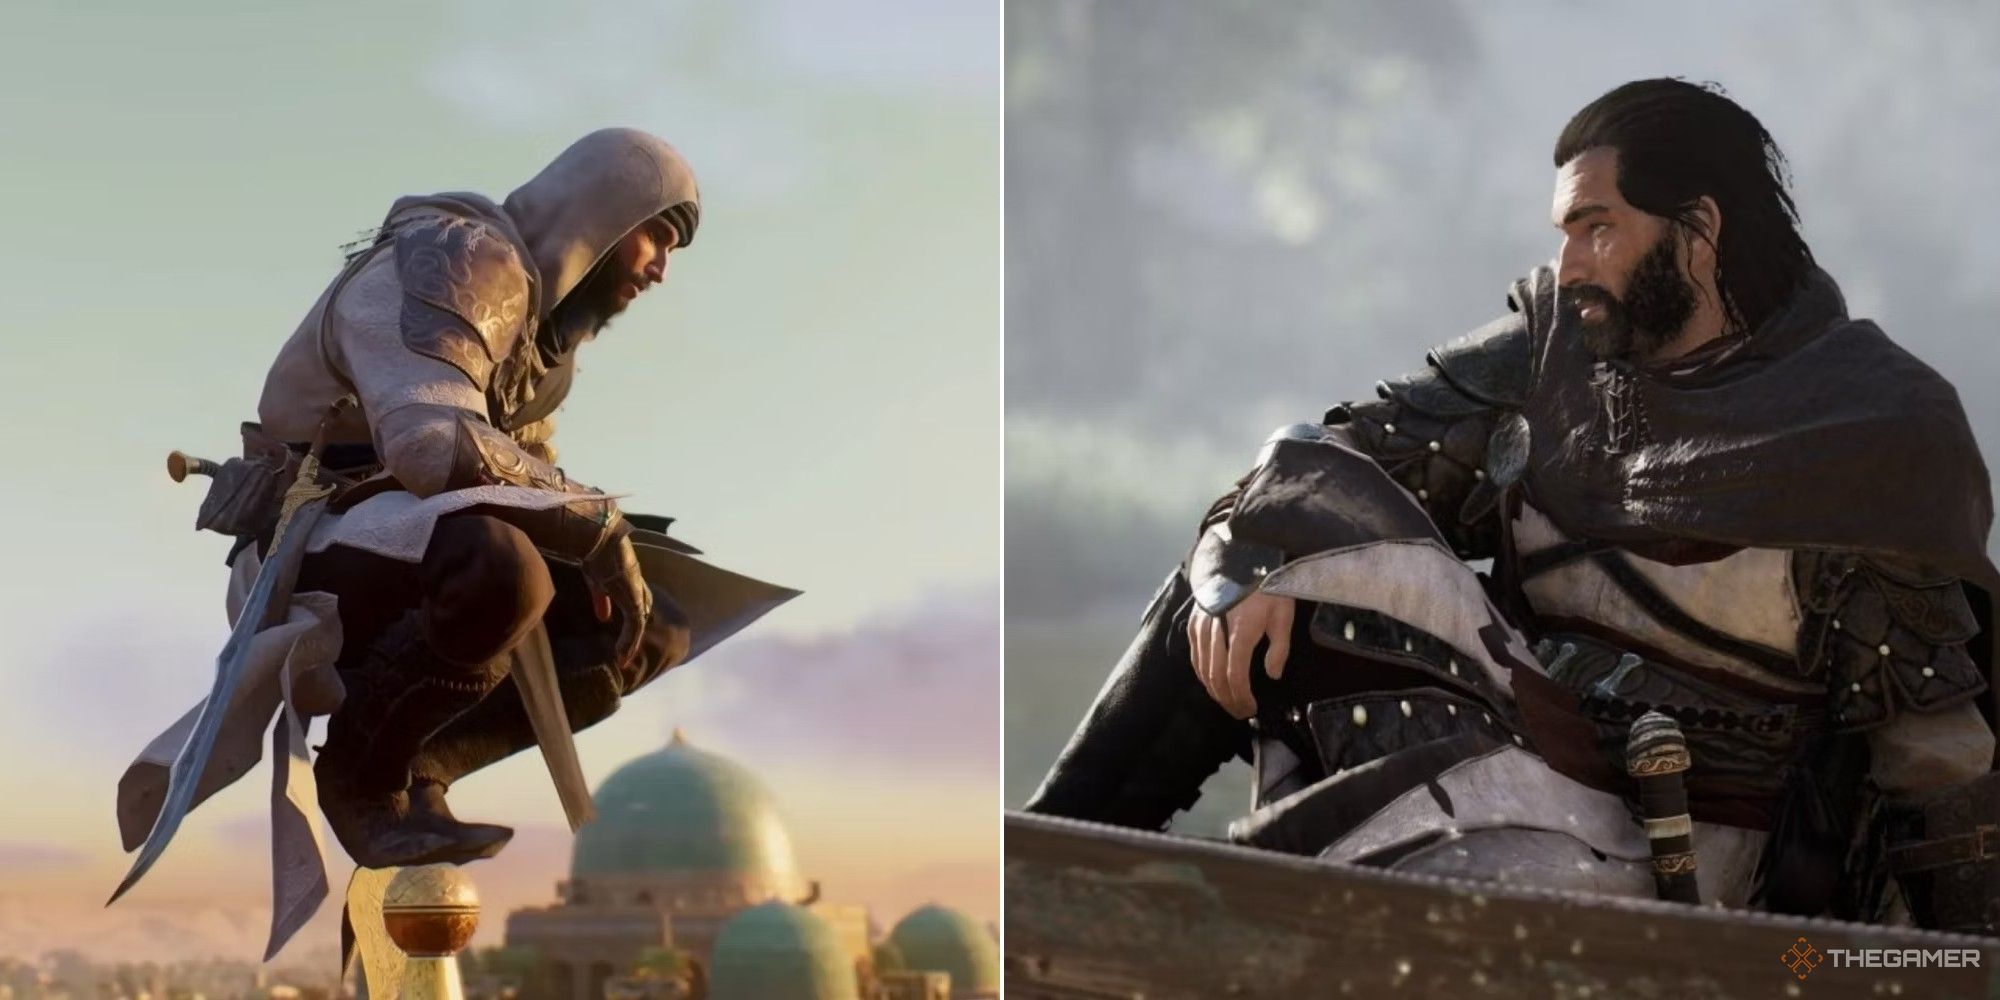 Collage from Assassin's Creed showing Basim in Mirage and Valhalla